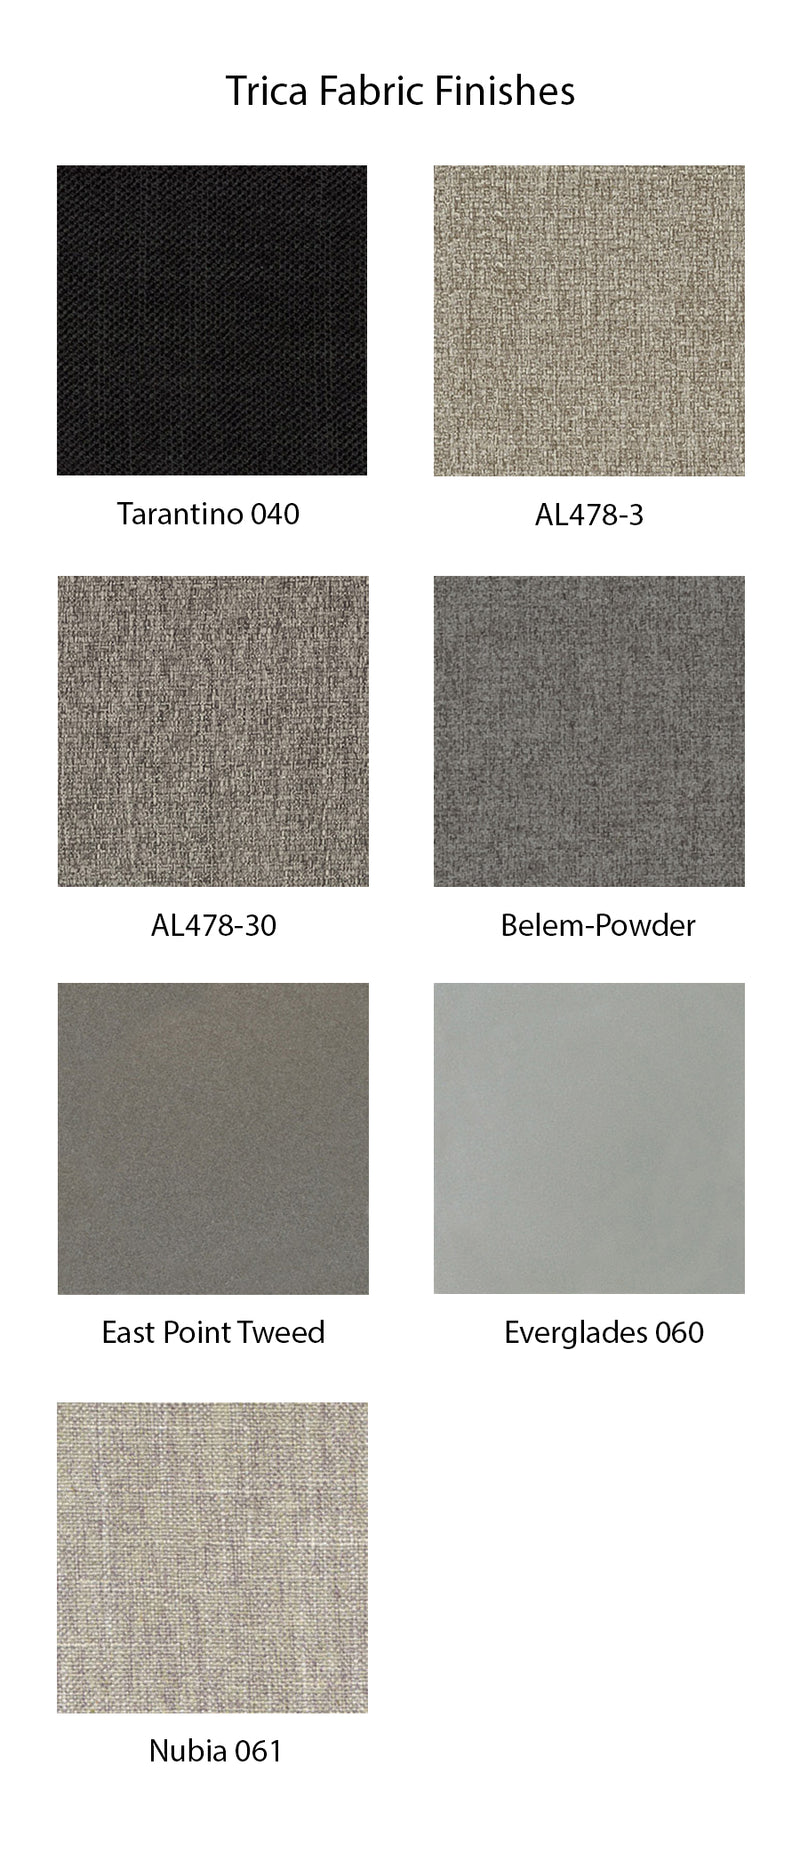 products/fabric-finishes-trica_8c998056-a774-4450-b8eb-5d1d9aab87f5.jpg